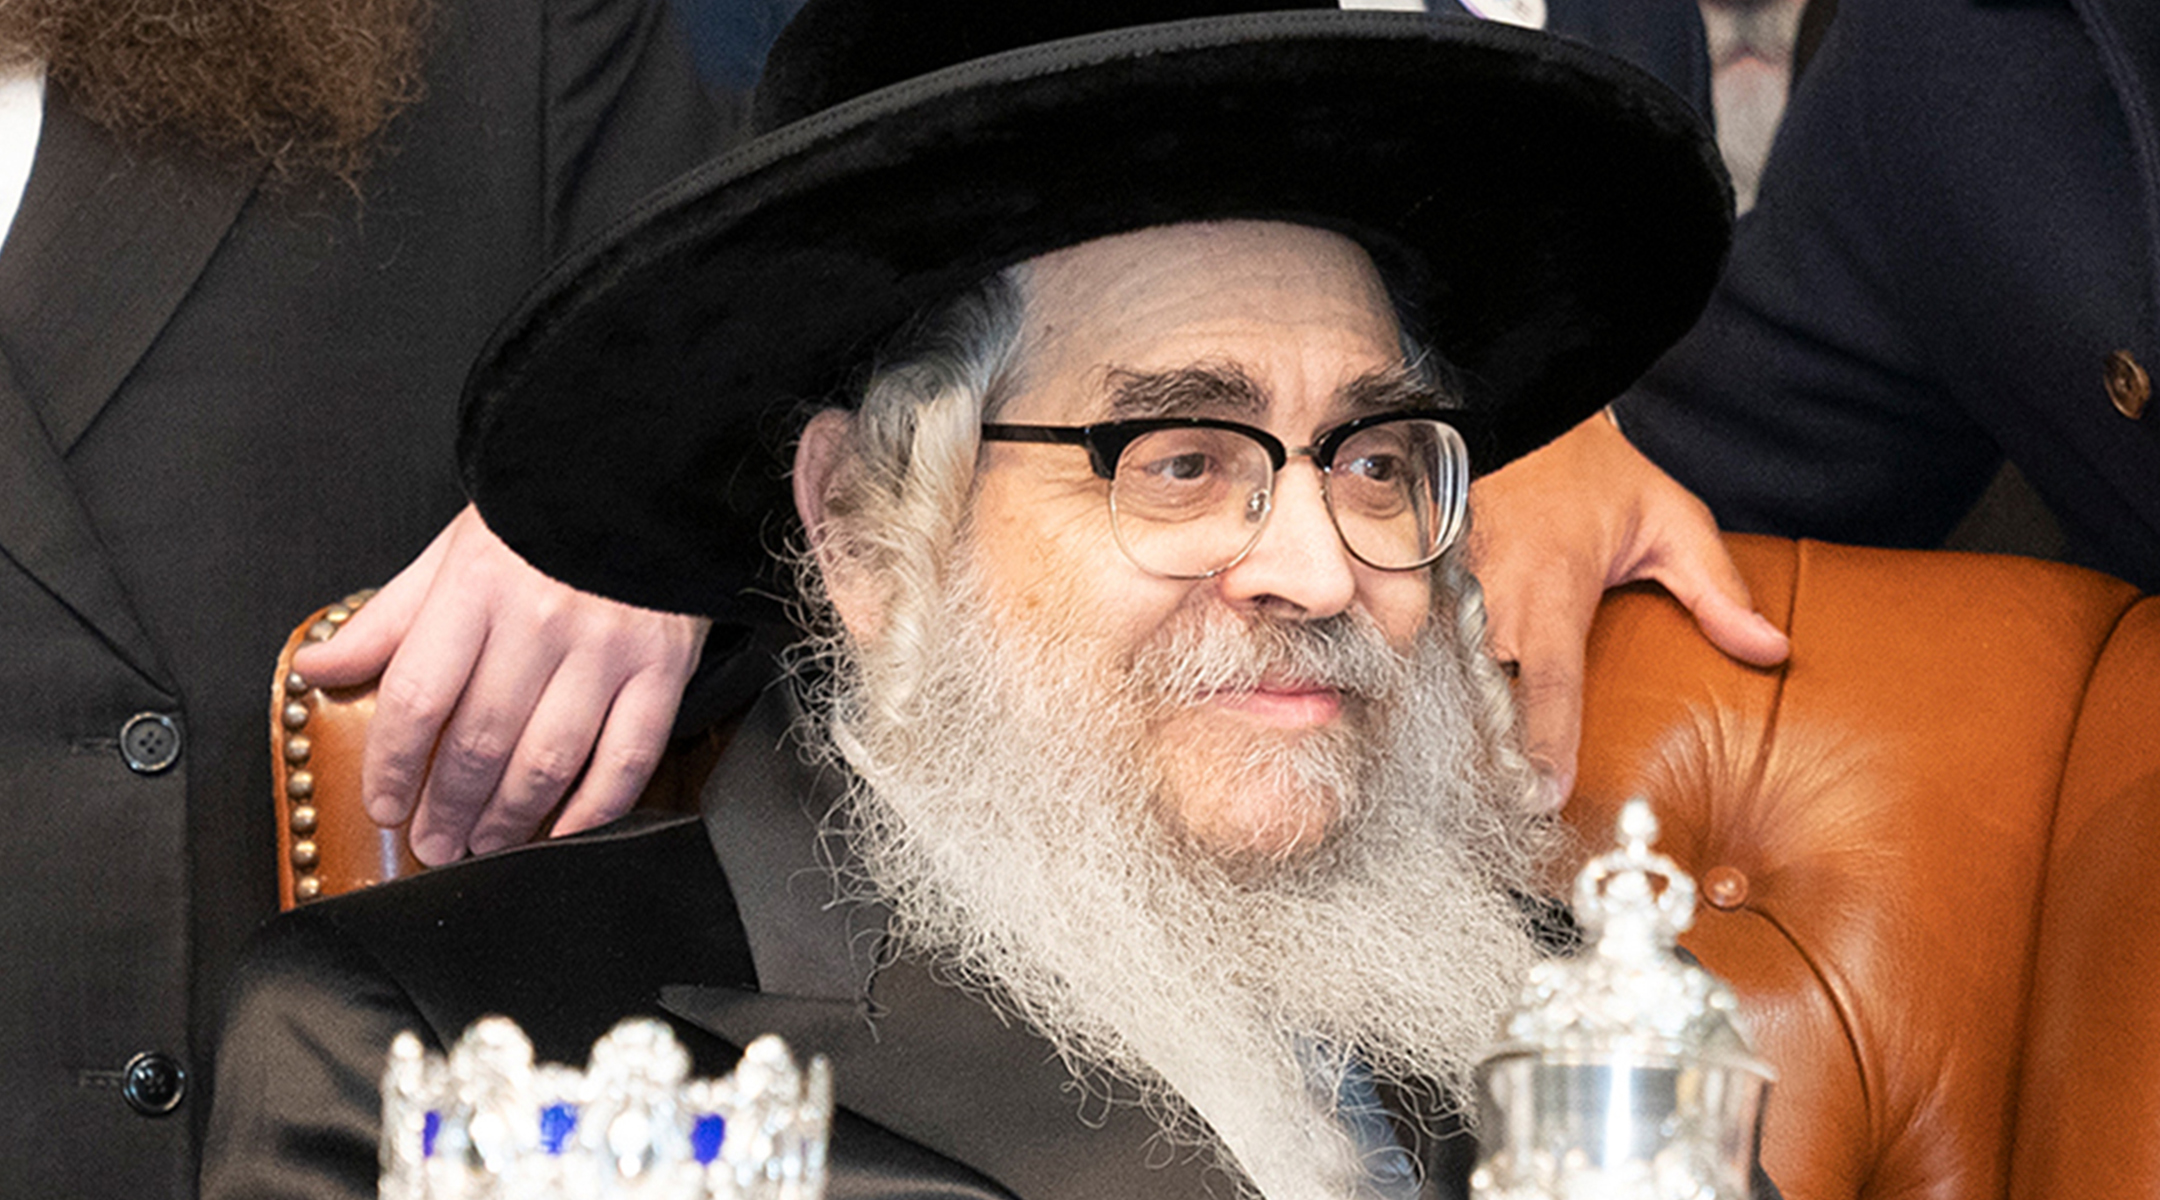 The Satmar Grand Rebbe Zalman Teitelbaum gives a blessing during the annual Satmar 21 Kislev event in 2019 as a day of thanksgiving at 355 Marcy Avenue. (Photo by Lev Radin/Pacific Press/LightRocket via Getty Images)